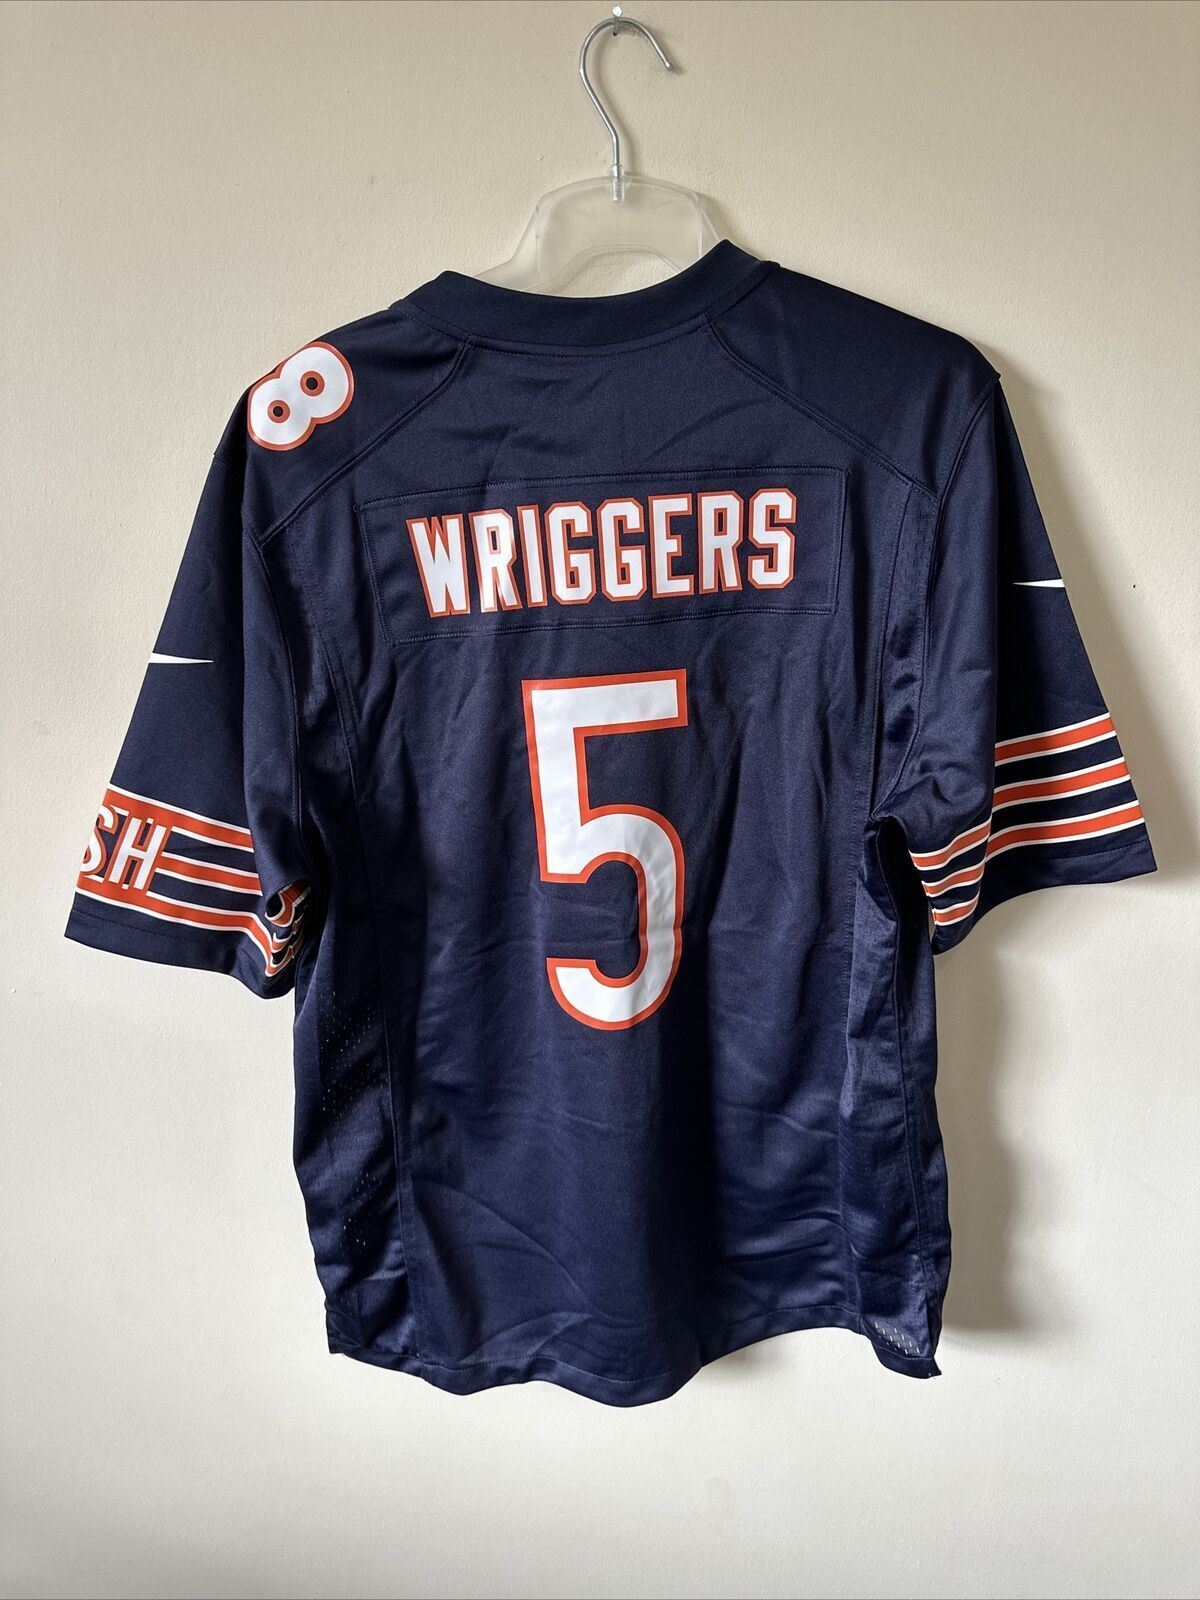 Nike NFL Chicago Bears Road Game Jersey WRIGGERS 5 Mens Size Medium